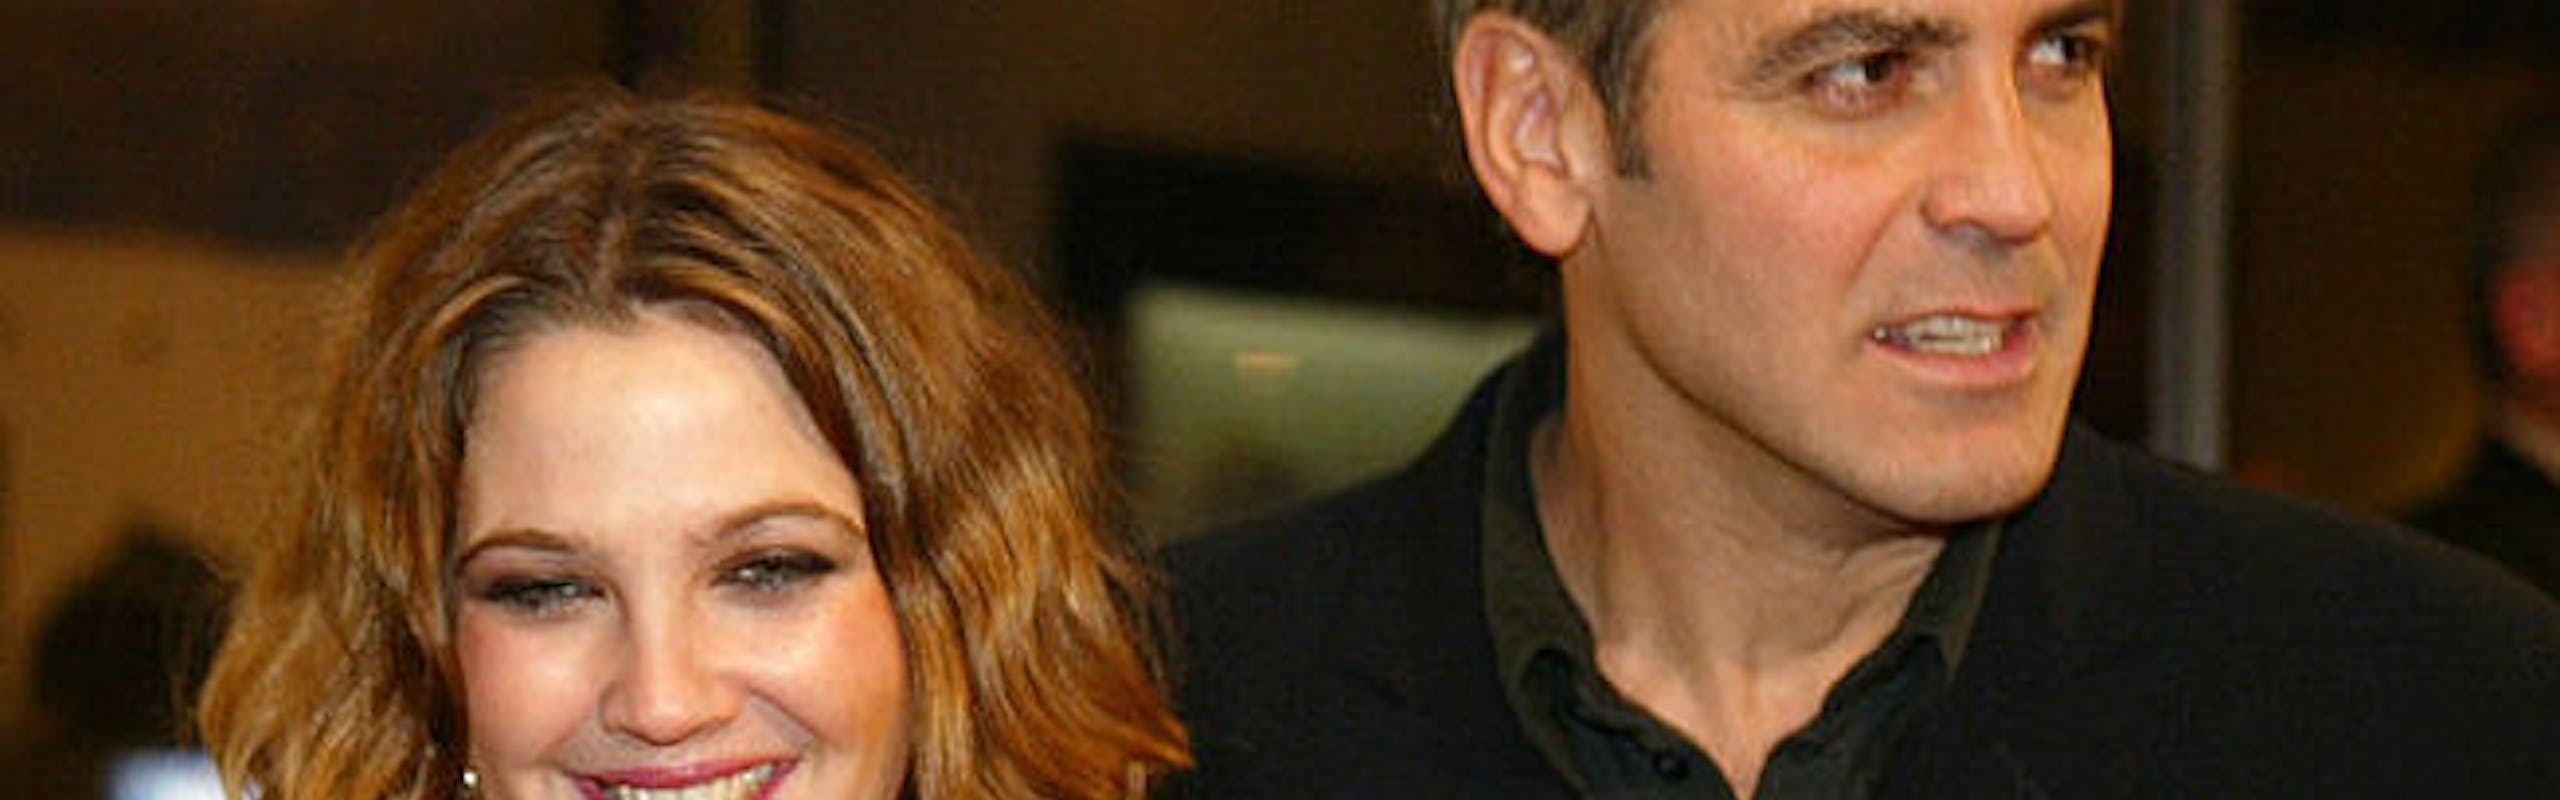 Drew Barrymore e George Clooney (Foto: Getty Images)